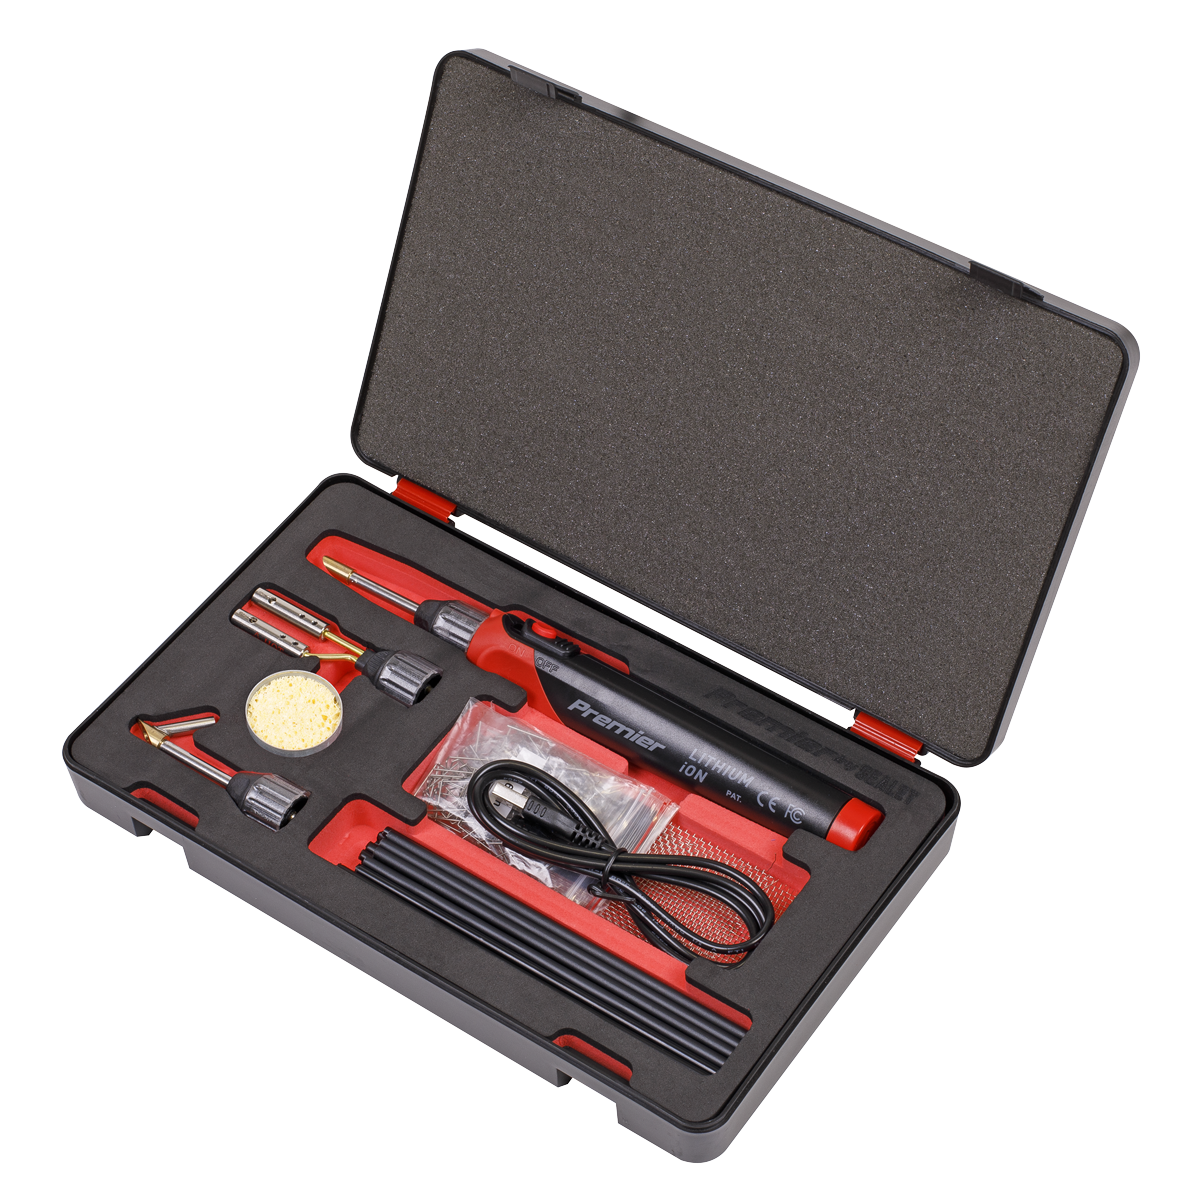 Kit includes plastic welding tip, plastic welding with pipe guide tip, hot staple tip, plastic welding rods in ABS/PP/PE/PS, reinforcing mesh (x3), 0.8mm flat staples (x50), 0.6mm flat staples (x50), USB charging lead and safety stand.